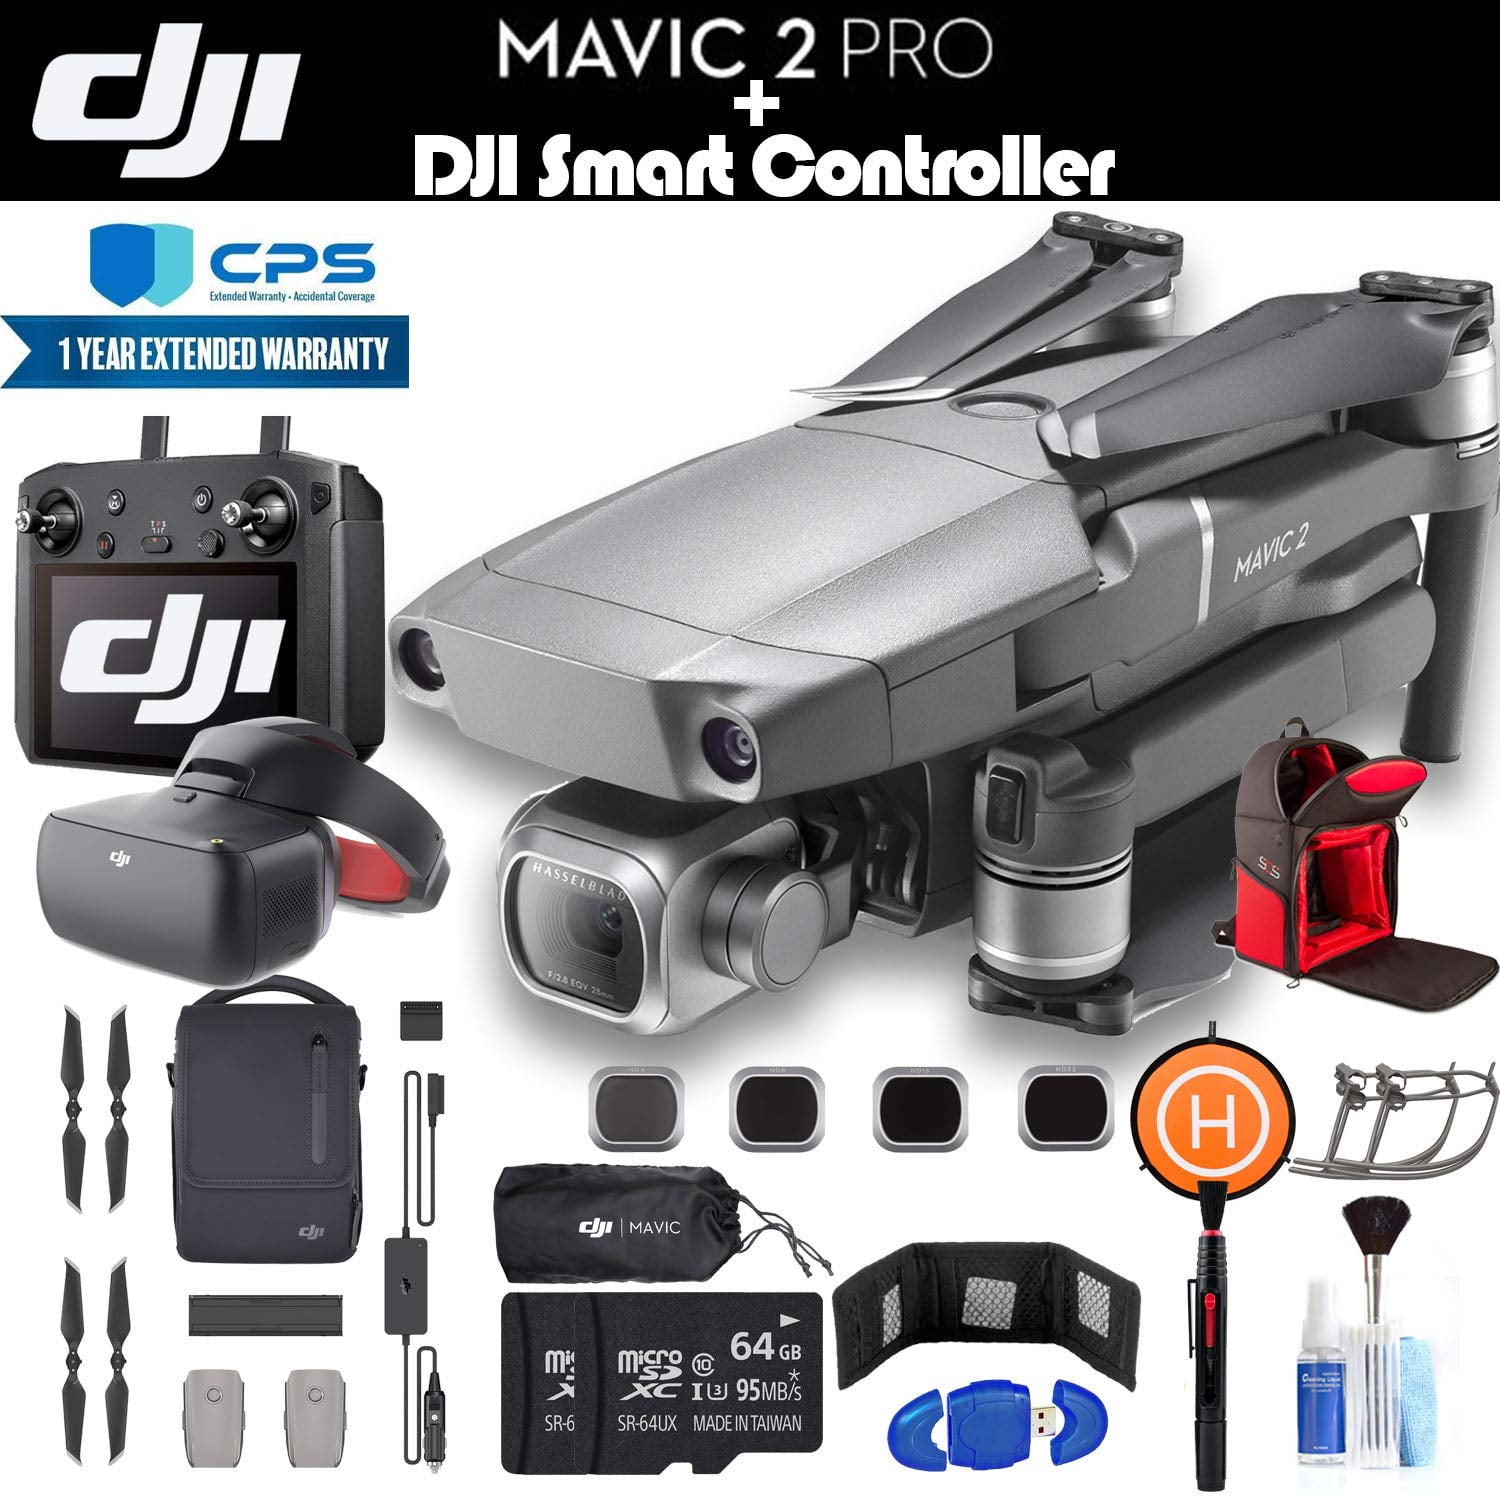 DJI Mavic 2 Pro with Smart Controller Fly More Combo, Goggles, 3 